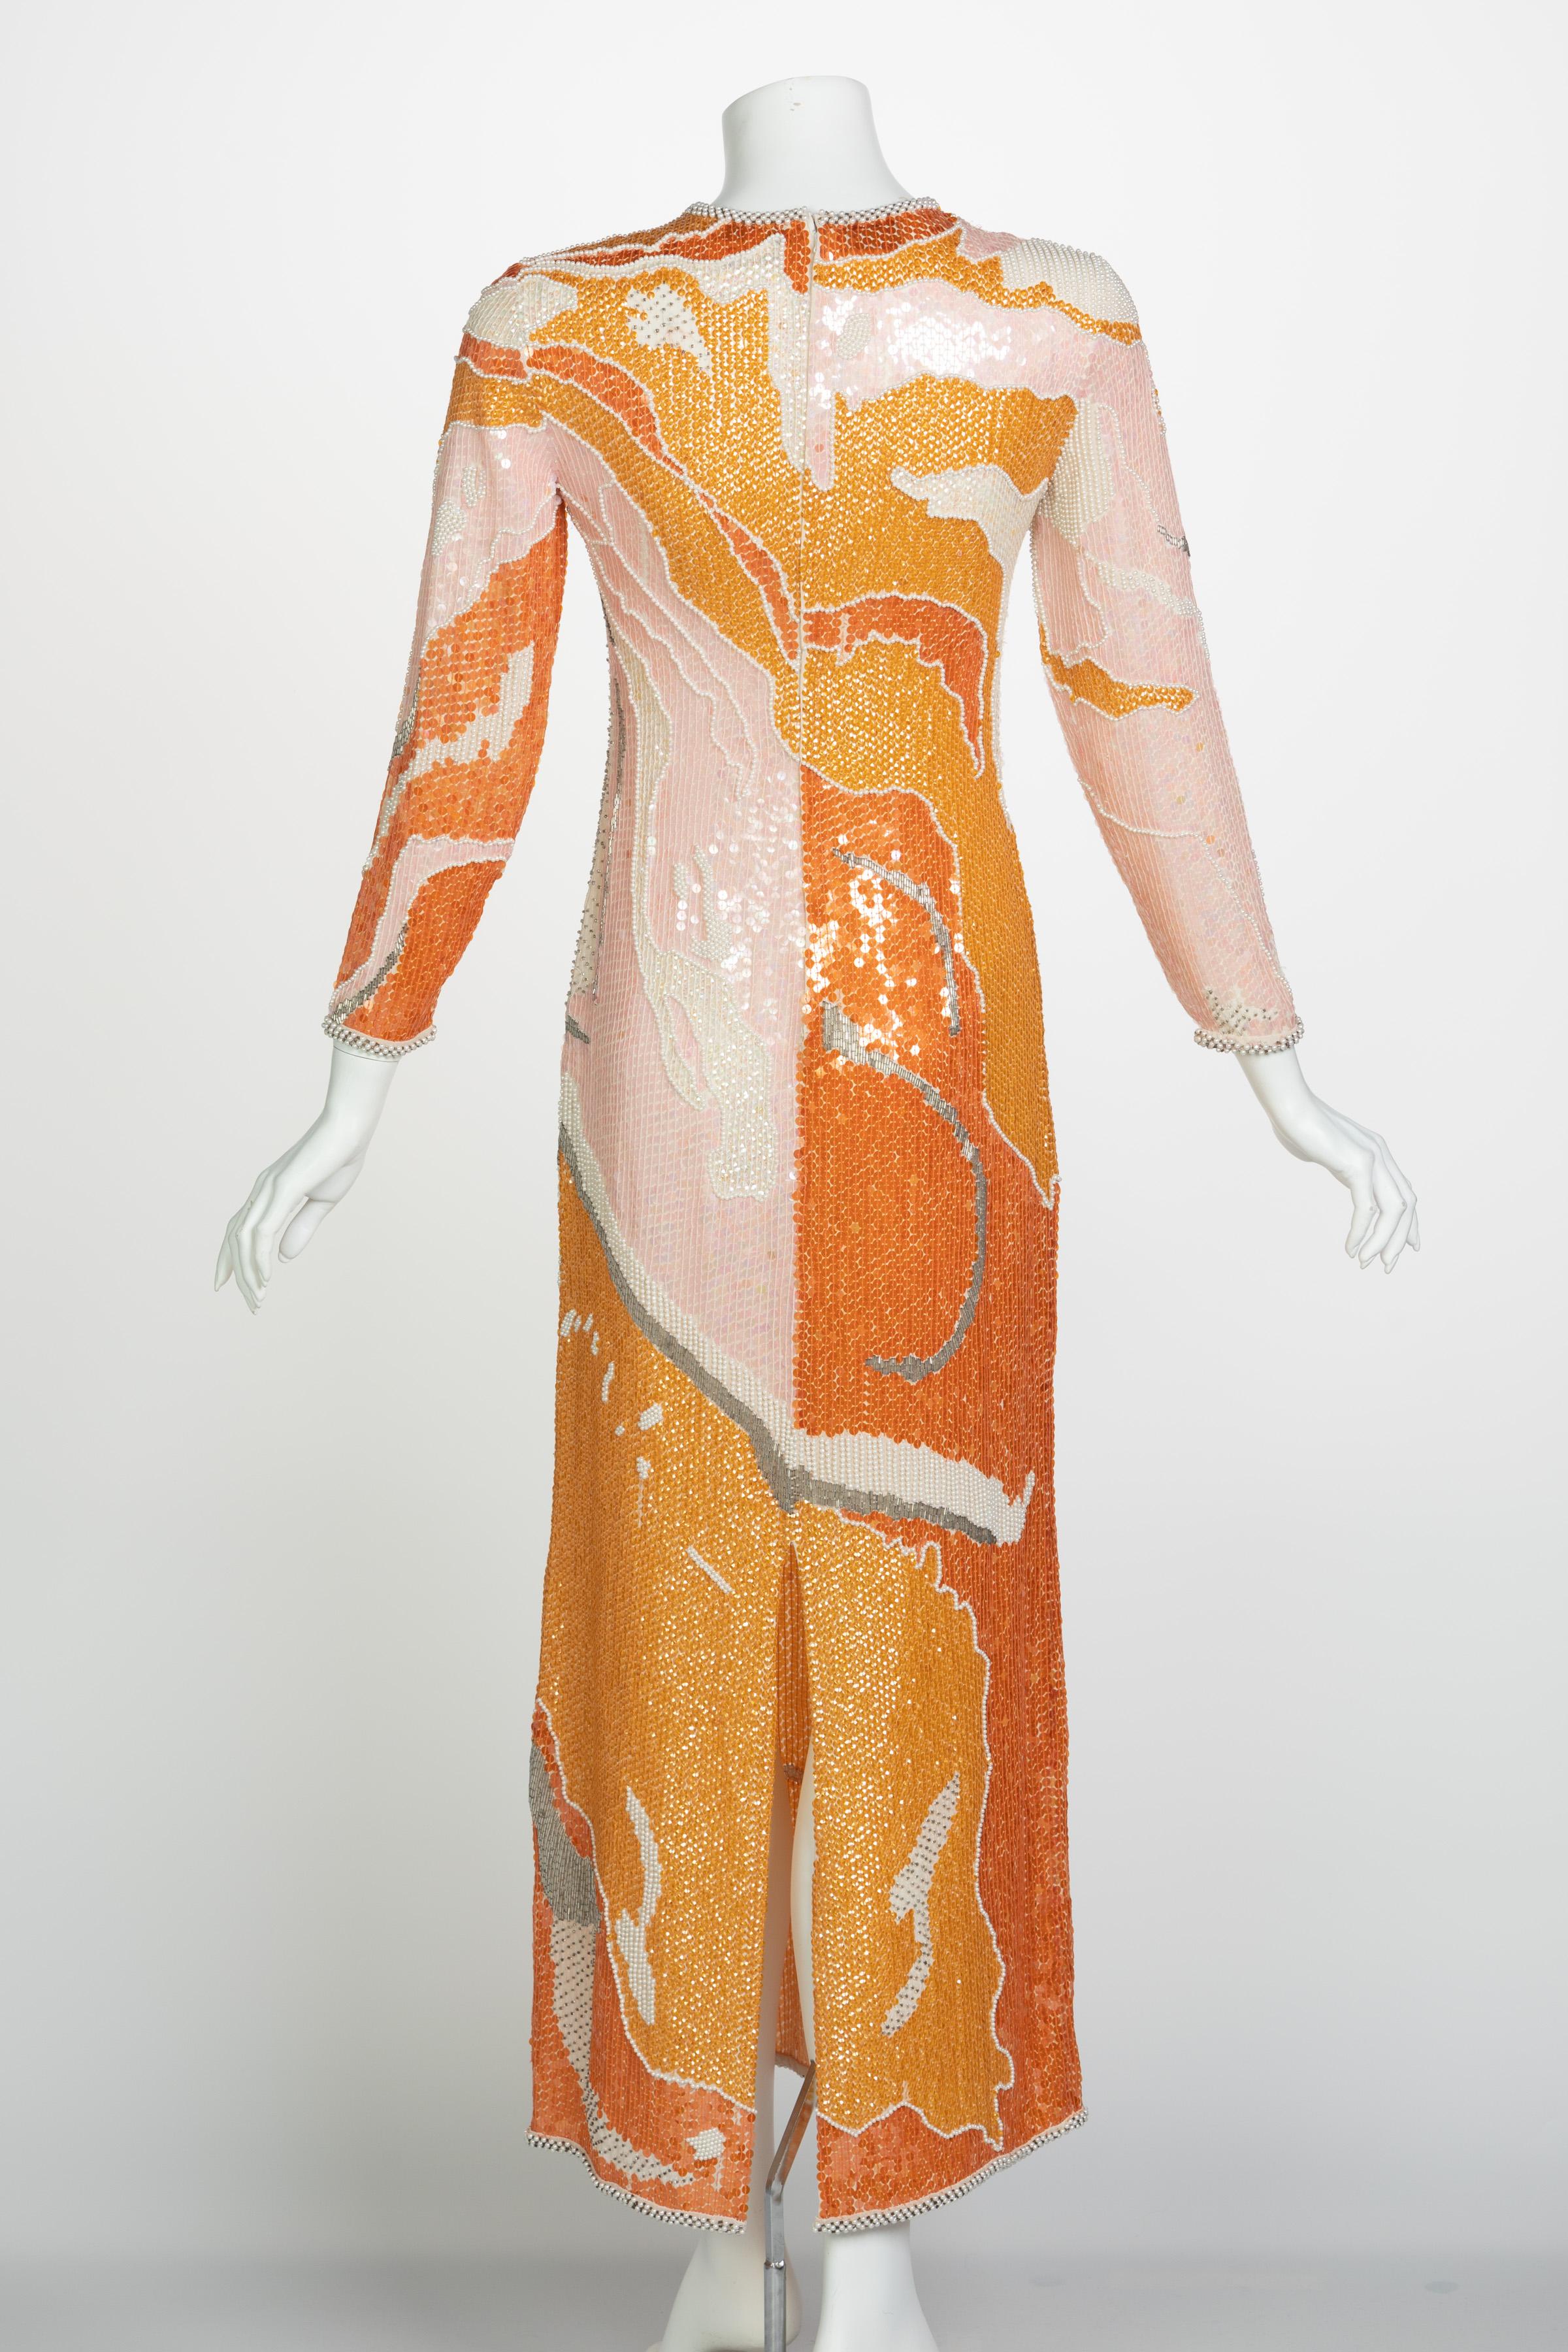 Halston Couture Sequin Pearl Beaded Sunset Colors Dress Documented, 1980s 1